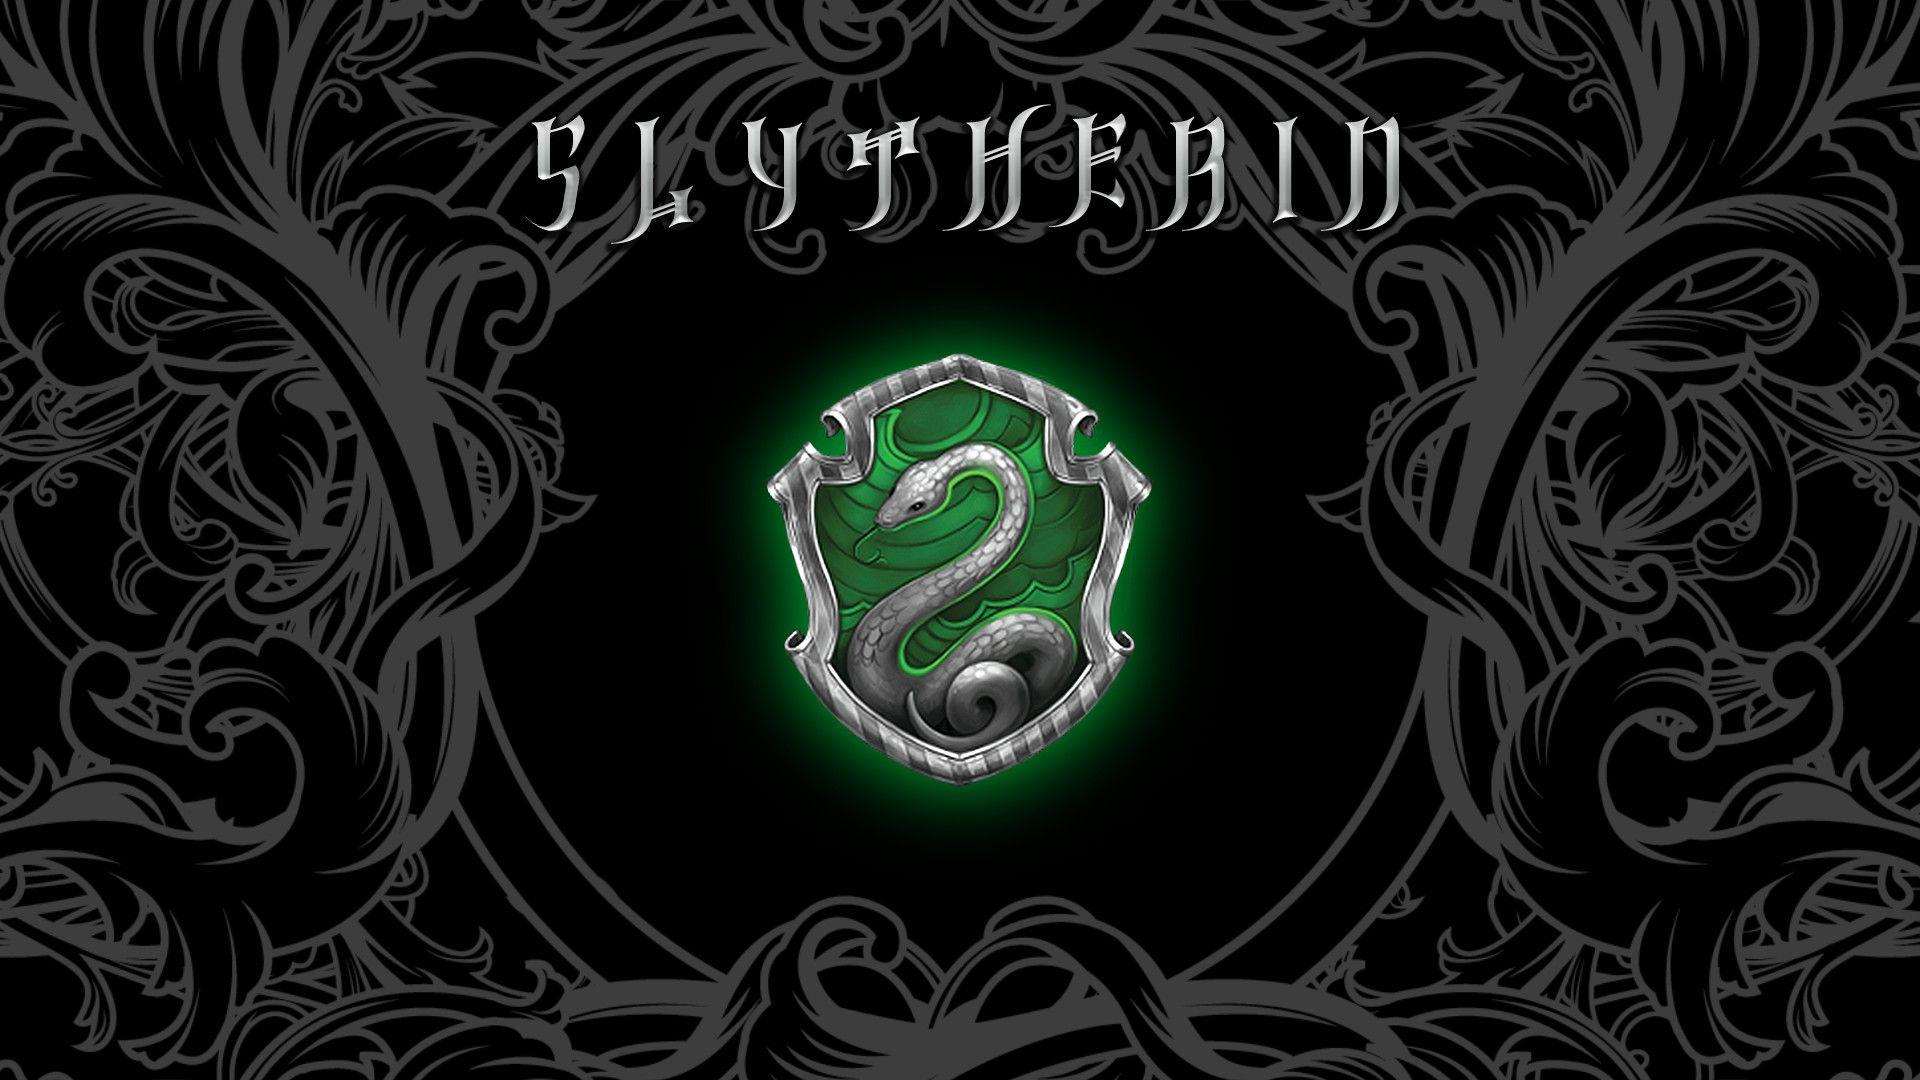 Slytherin House Wallpapers - Wallpaper Cave